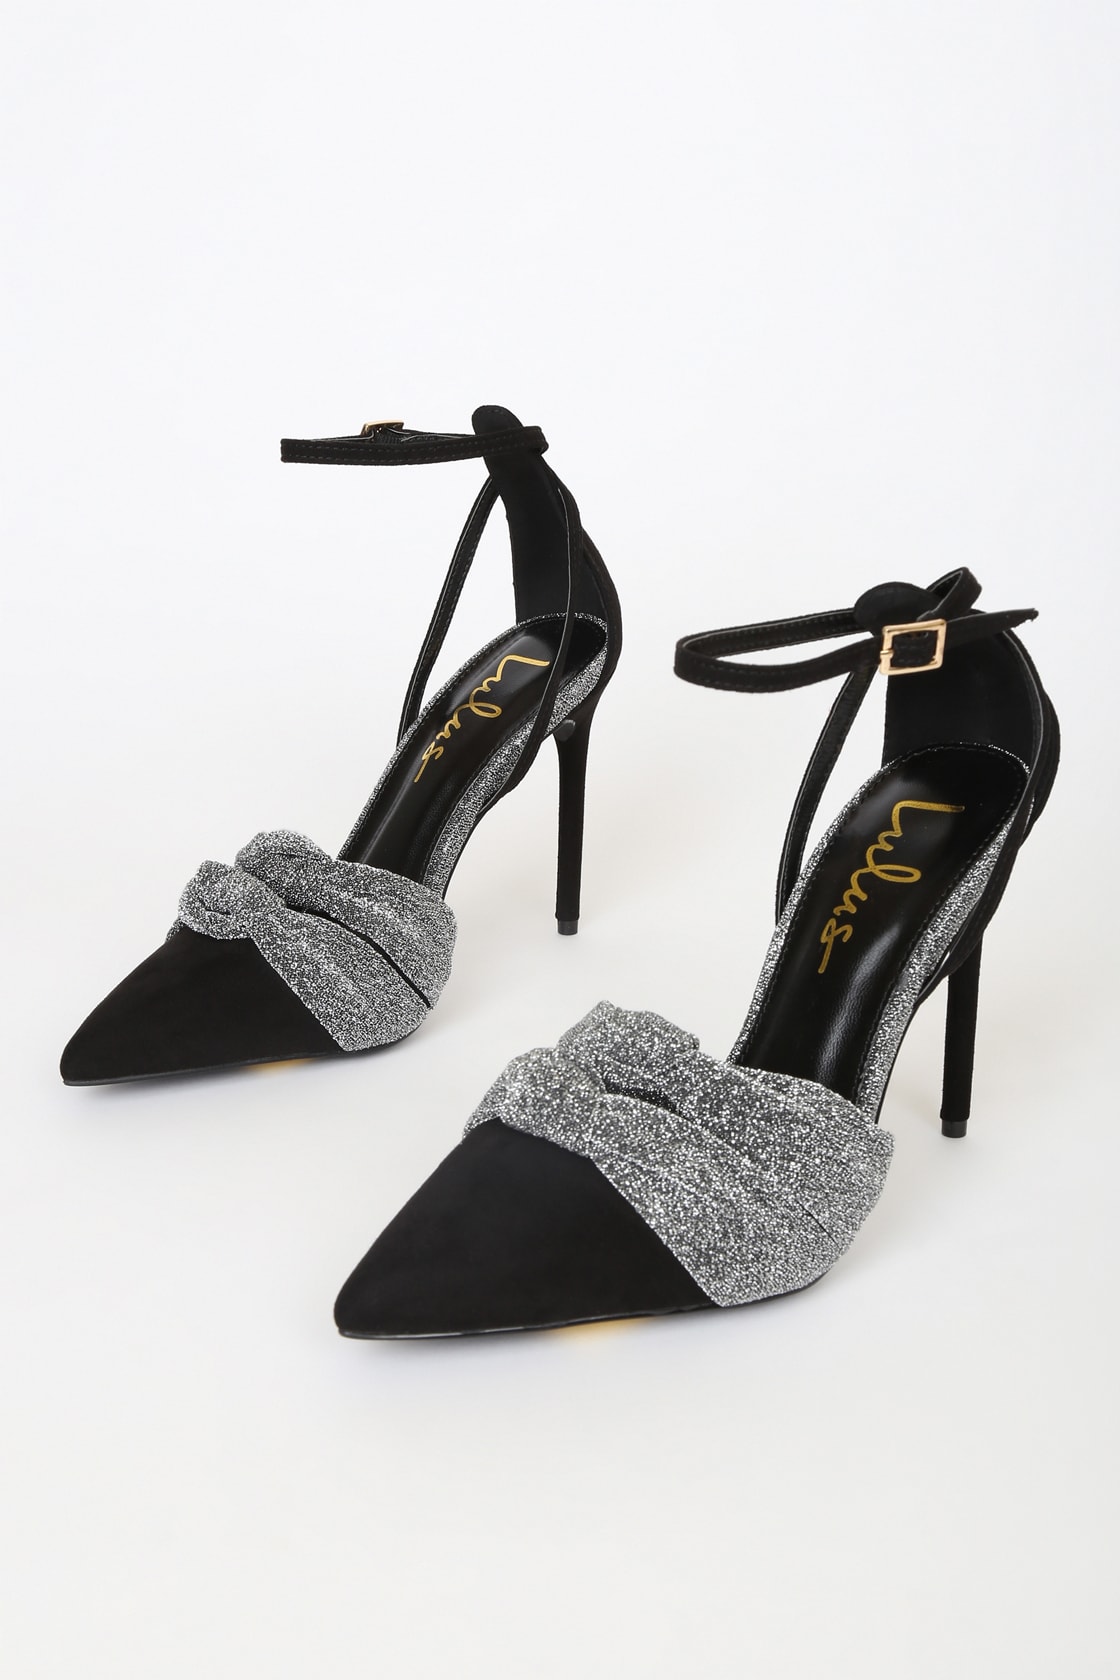 Santina Black and Pewter Pointed-Toe Ankle Strap Pumps